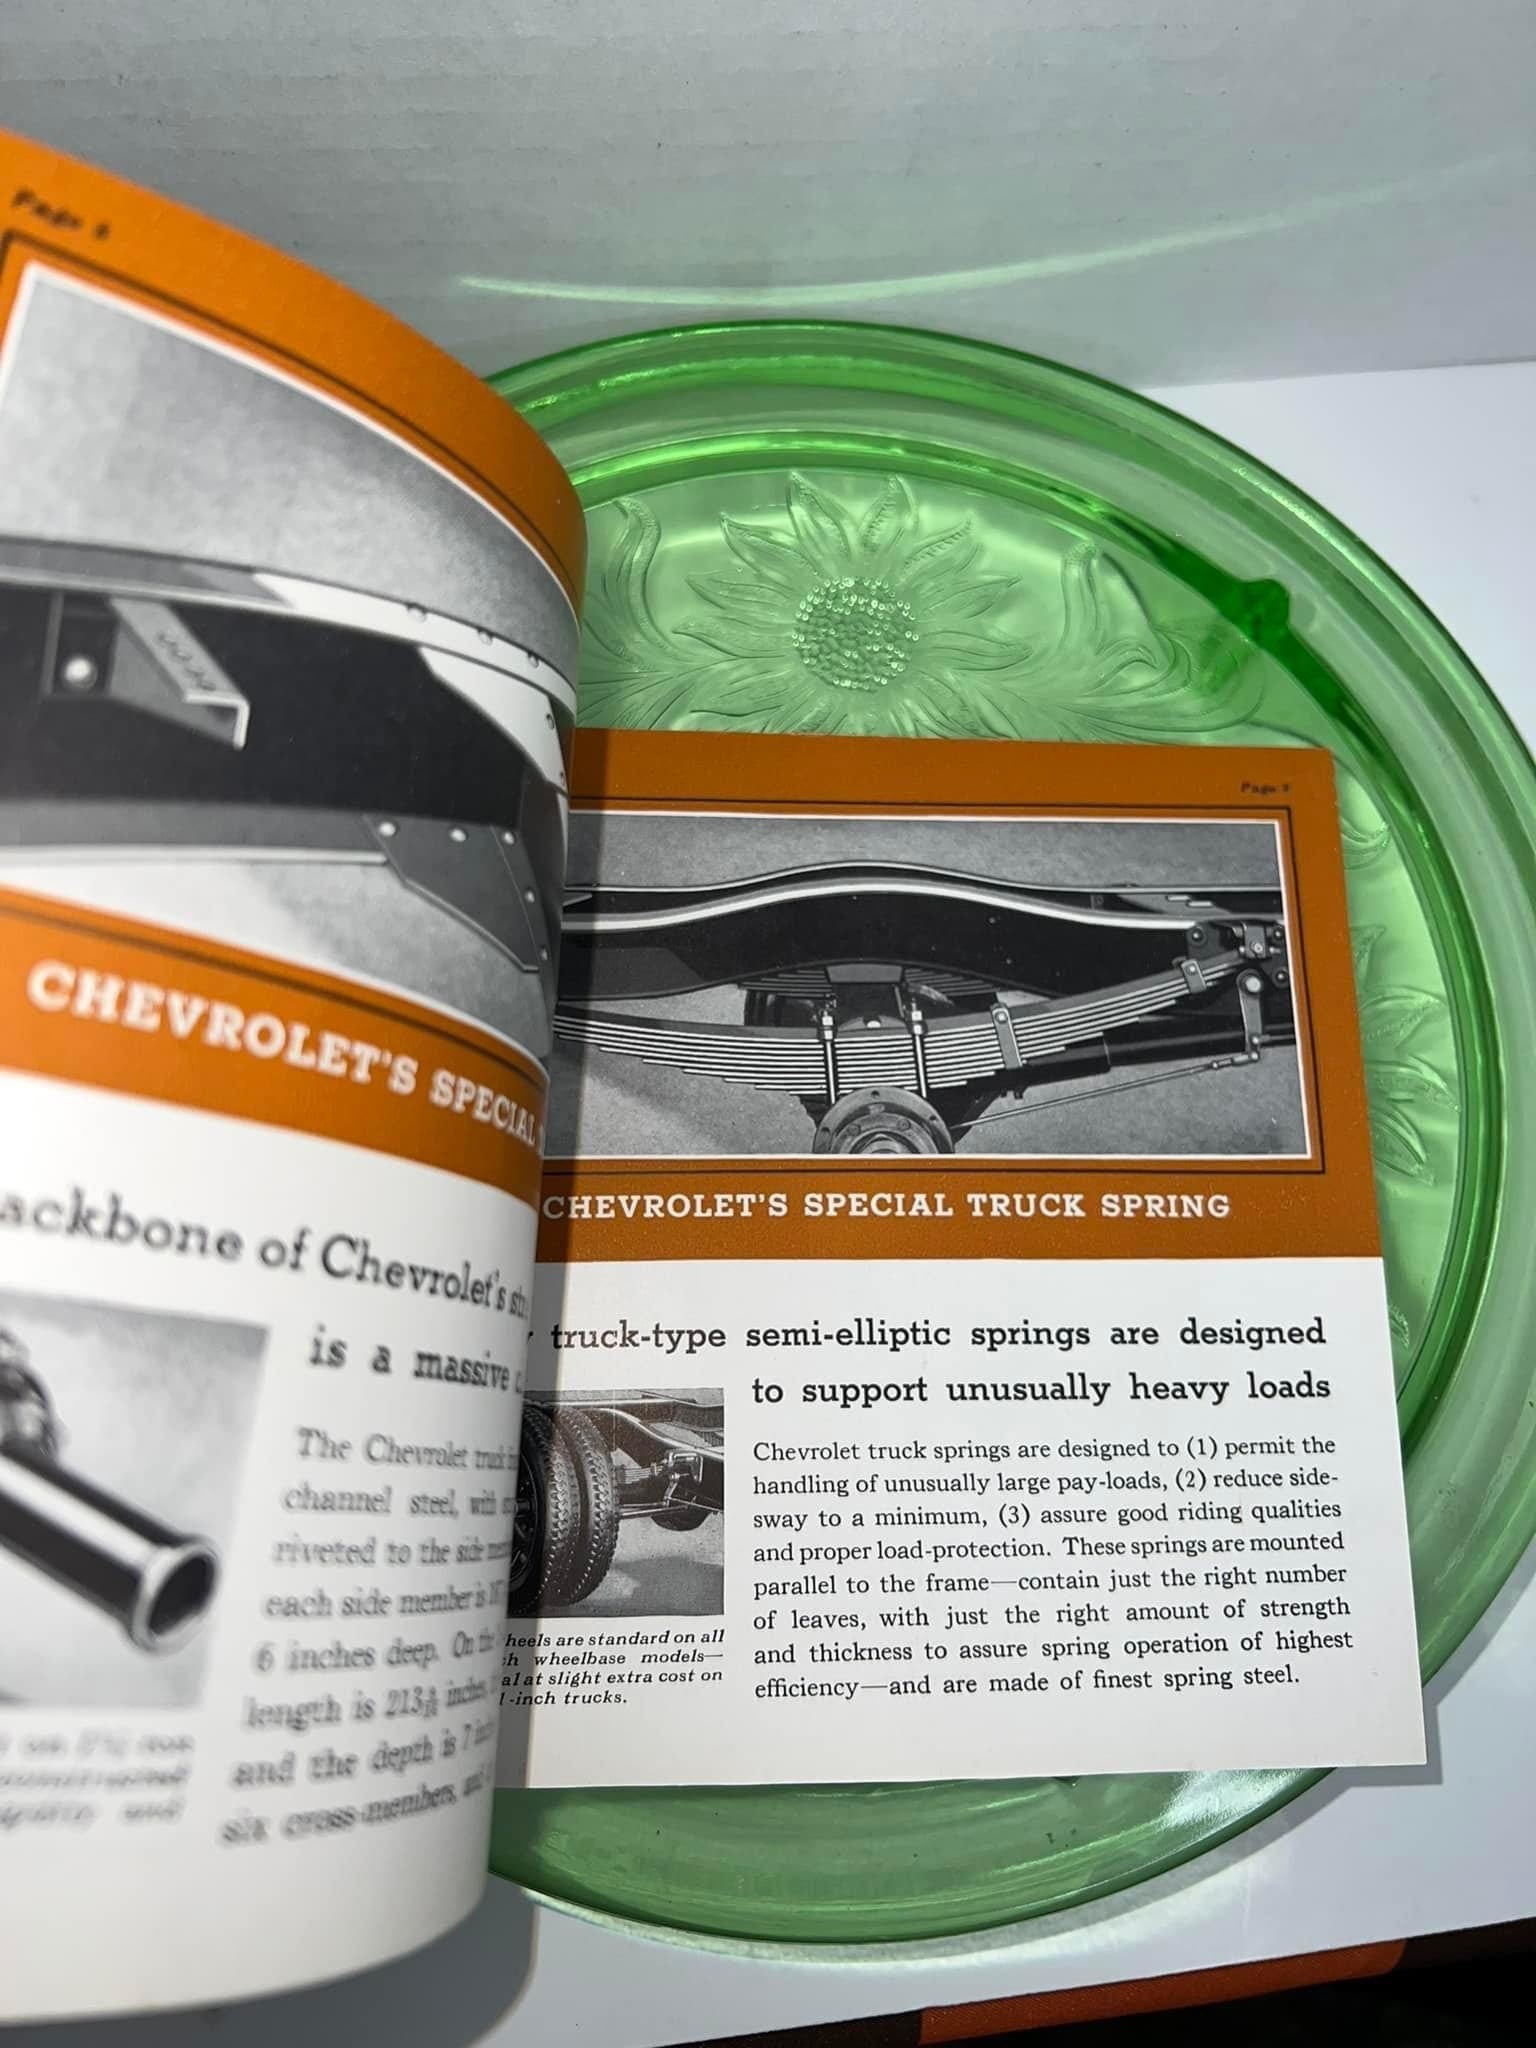 Early Chevy truck advertising C 1931 Small booklet vintage automobile advertising